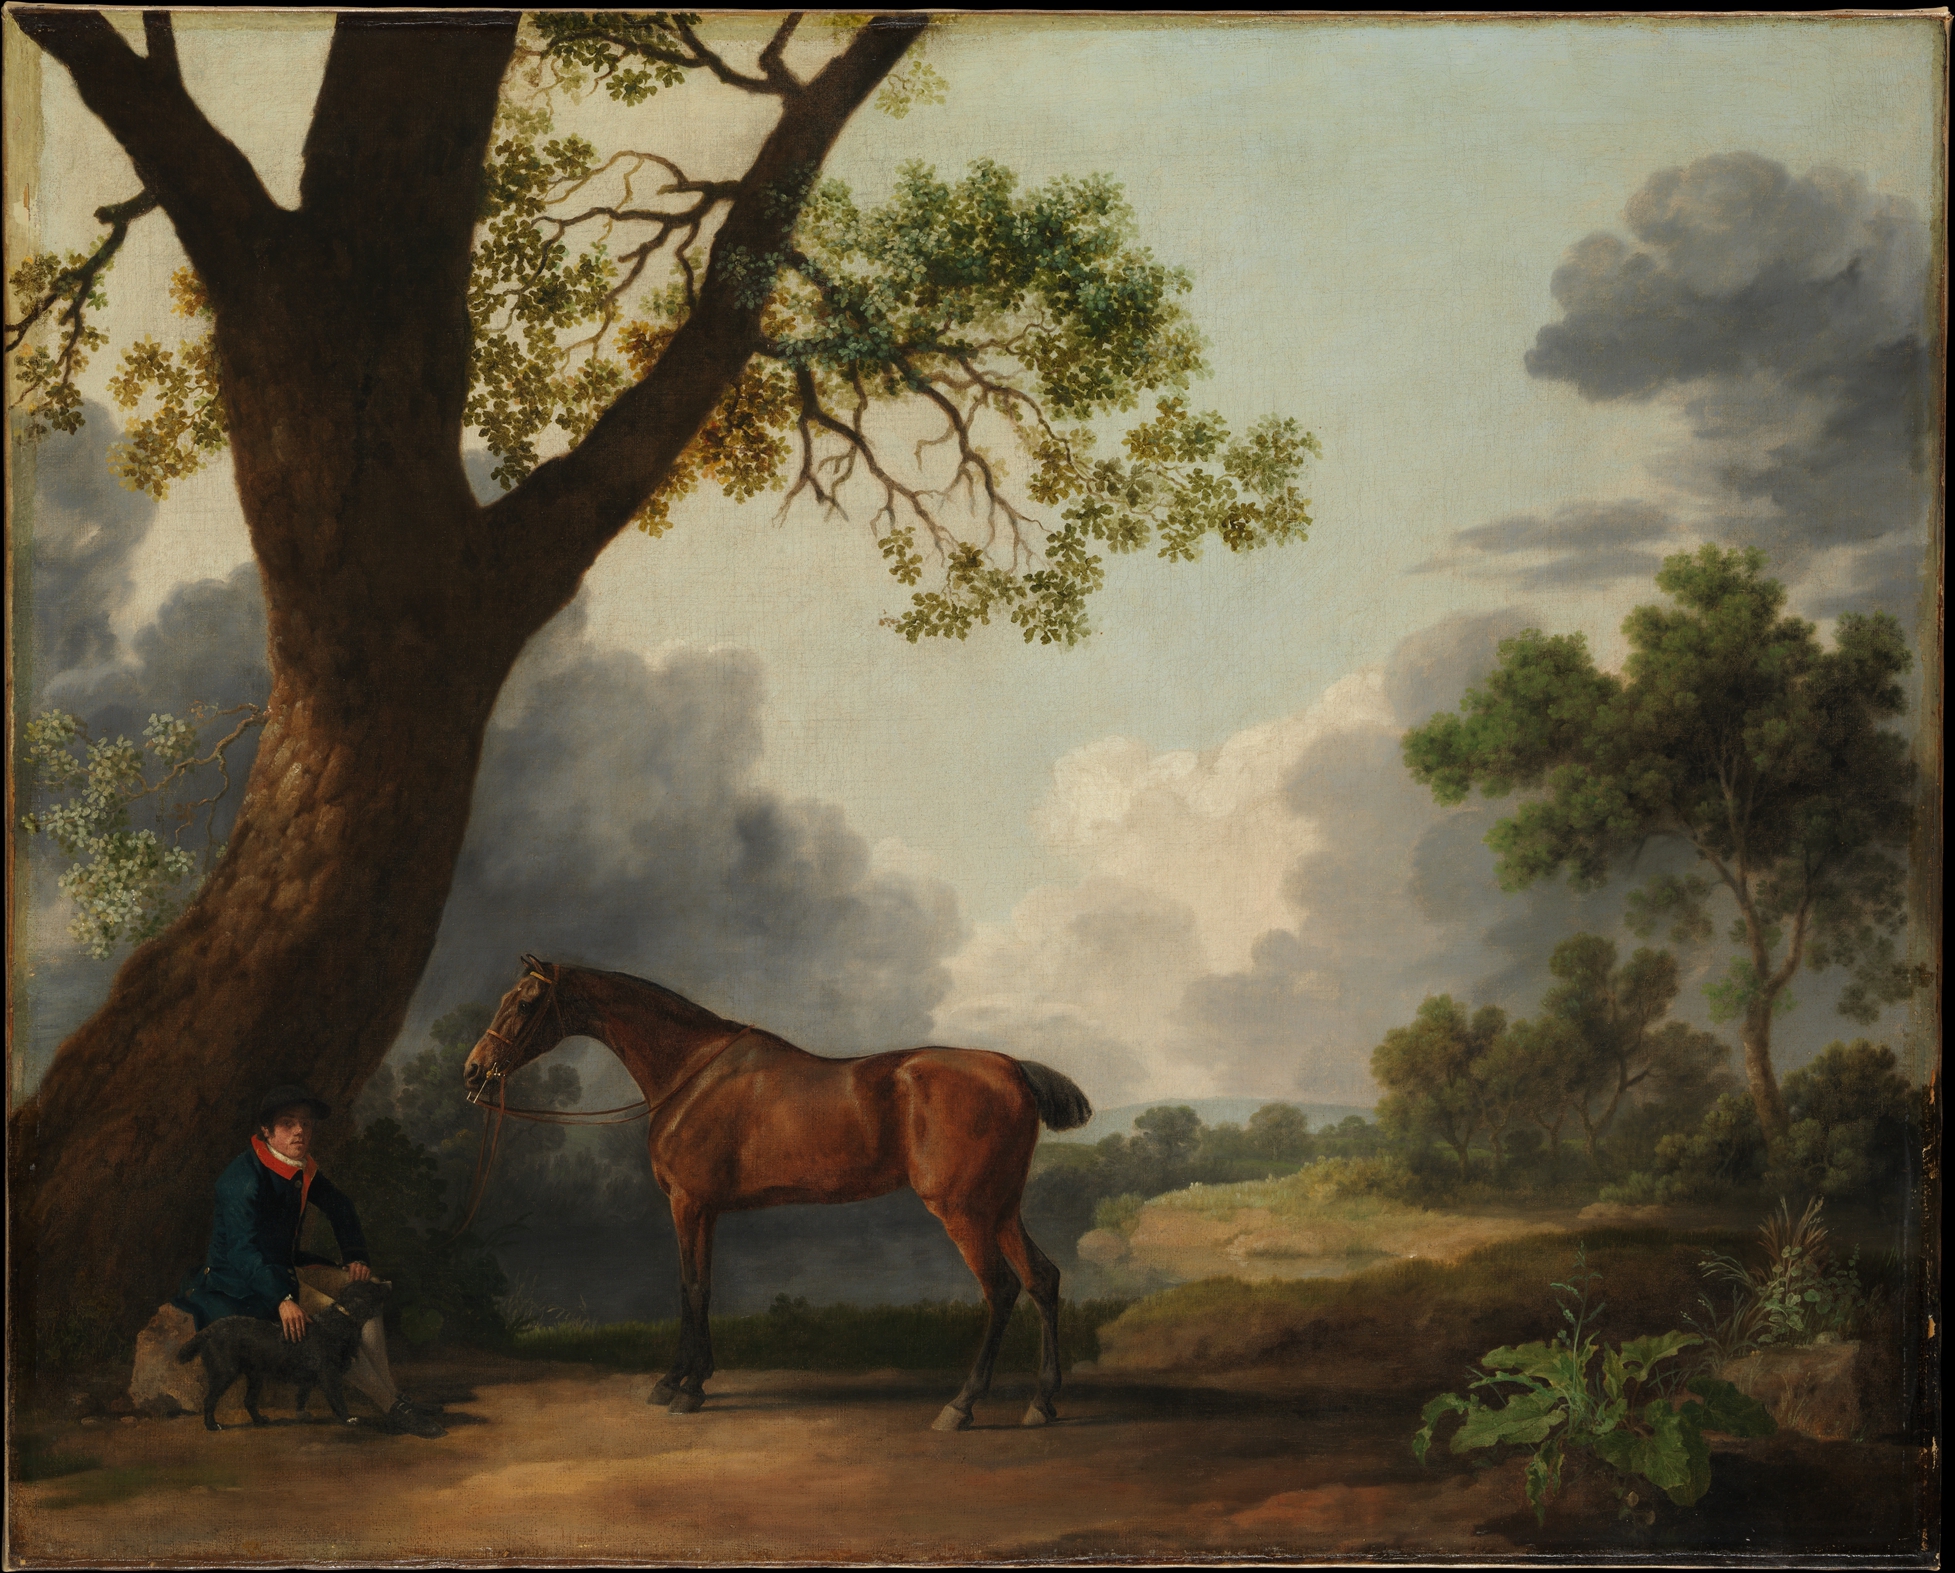 The Third Duke of Dorset's Hunter with a Groom and a Dog by George Stubbs - 1768 - 101.6 x 126.4 cm Metropolitan Museum of Art